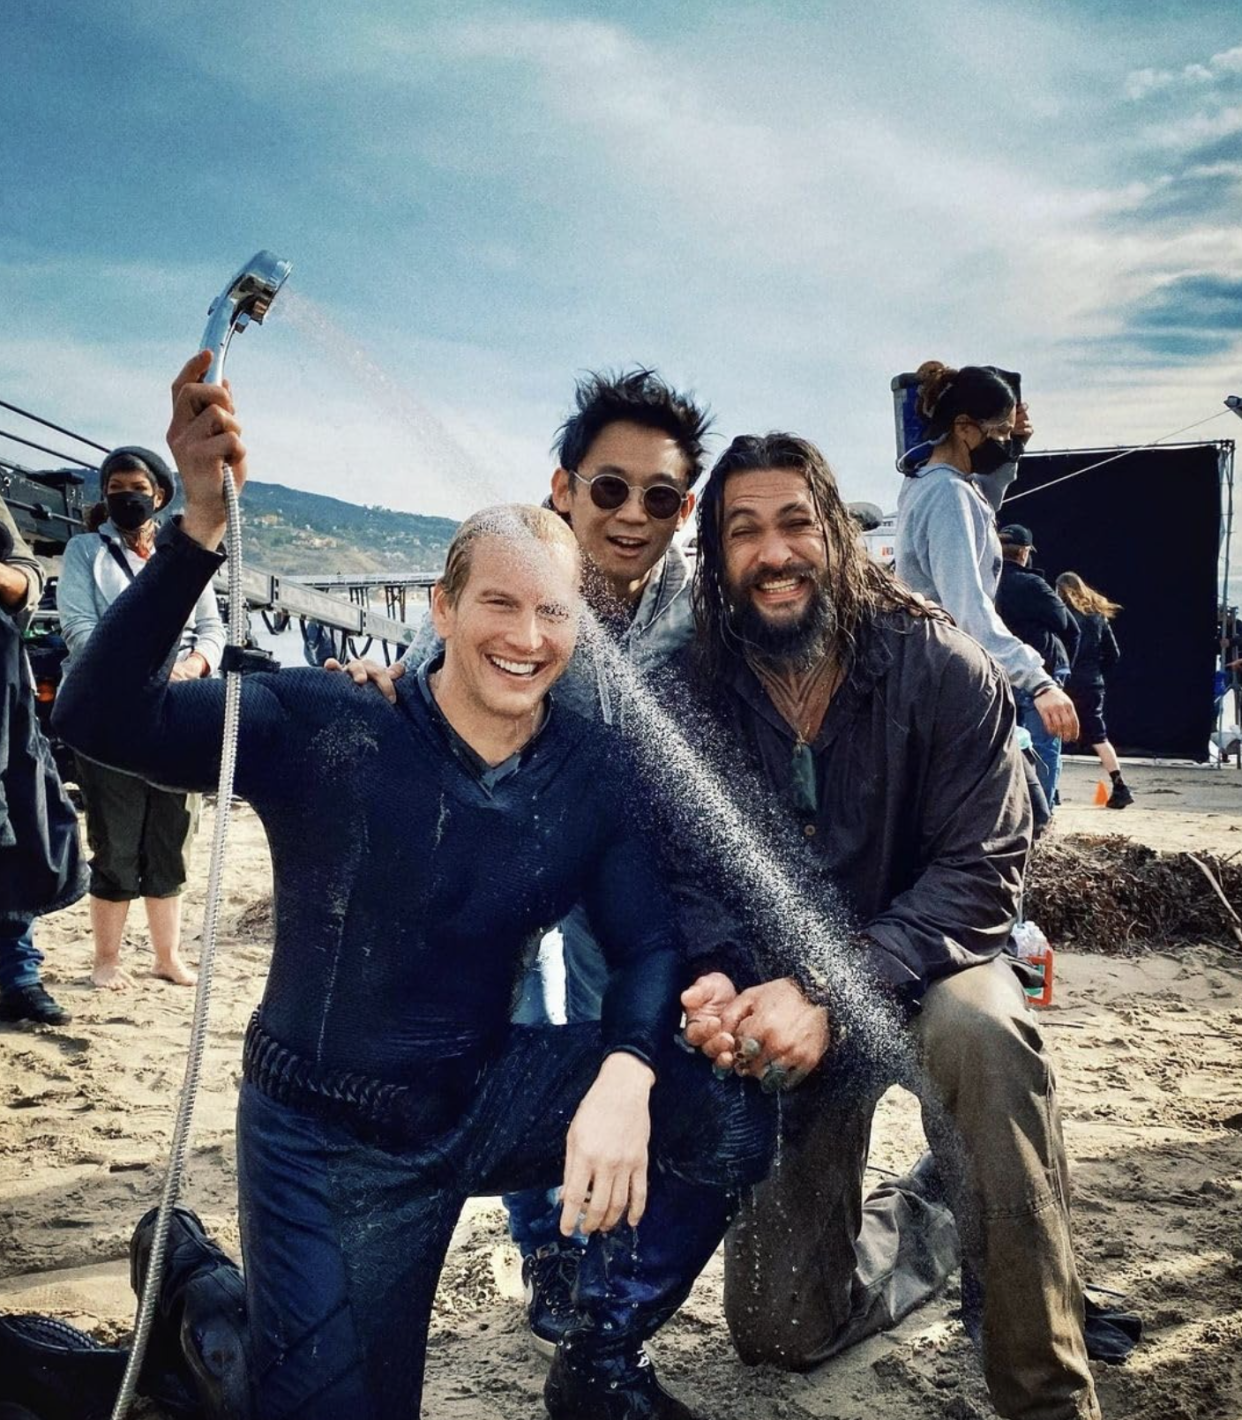 Patrick Wilson, James Wan and Jason Momoa celebrate the end of the shoot on the beach in Malibu. (Warner Bros./Atomic Monster/DC Studios)